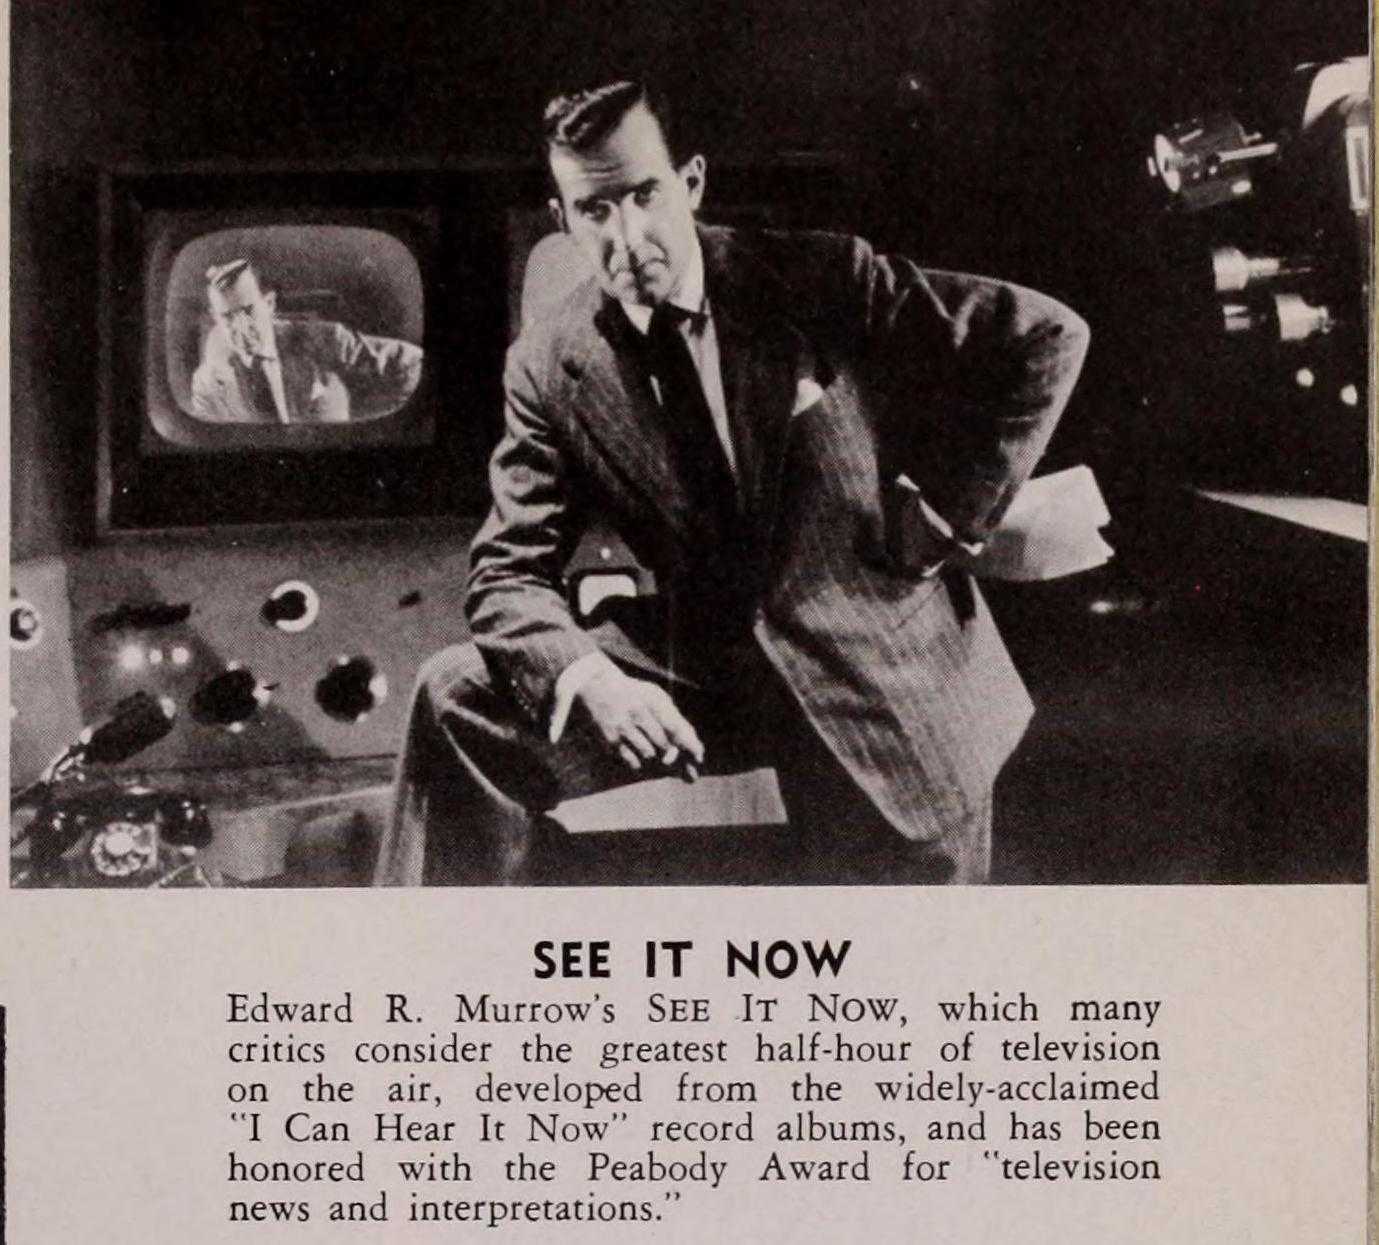 In the late 1940s, Fred Friendly began his collaboration with Edward R. Murrow by asking him to narrate *I Can Hear It Now*, a series of record albums using original recordings to portray historical events. The duo later developed the concept into *See It Now*, a CBS News television program premiering in November 1951.

*Swing* (August 1953). Kansas City: WHB Broadcasting Co. [Courtesy of Media History Digital Library](https://lantern.mediahist.org/catalog/swing9141whbb_0247).